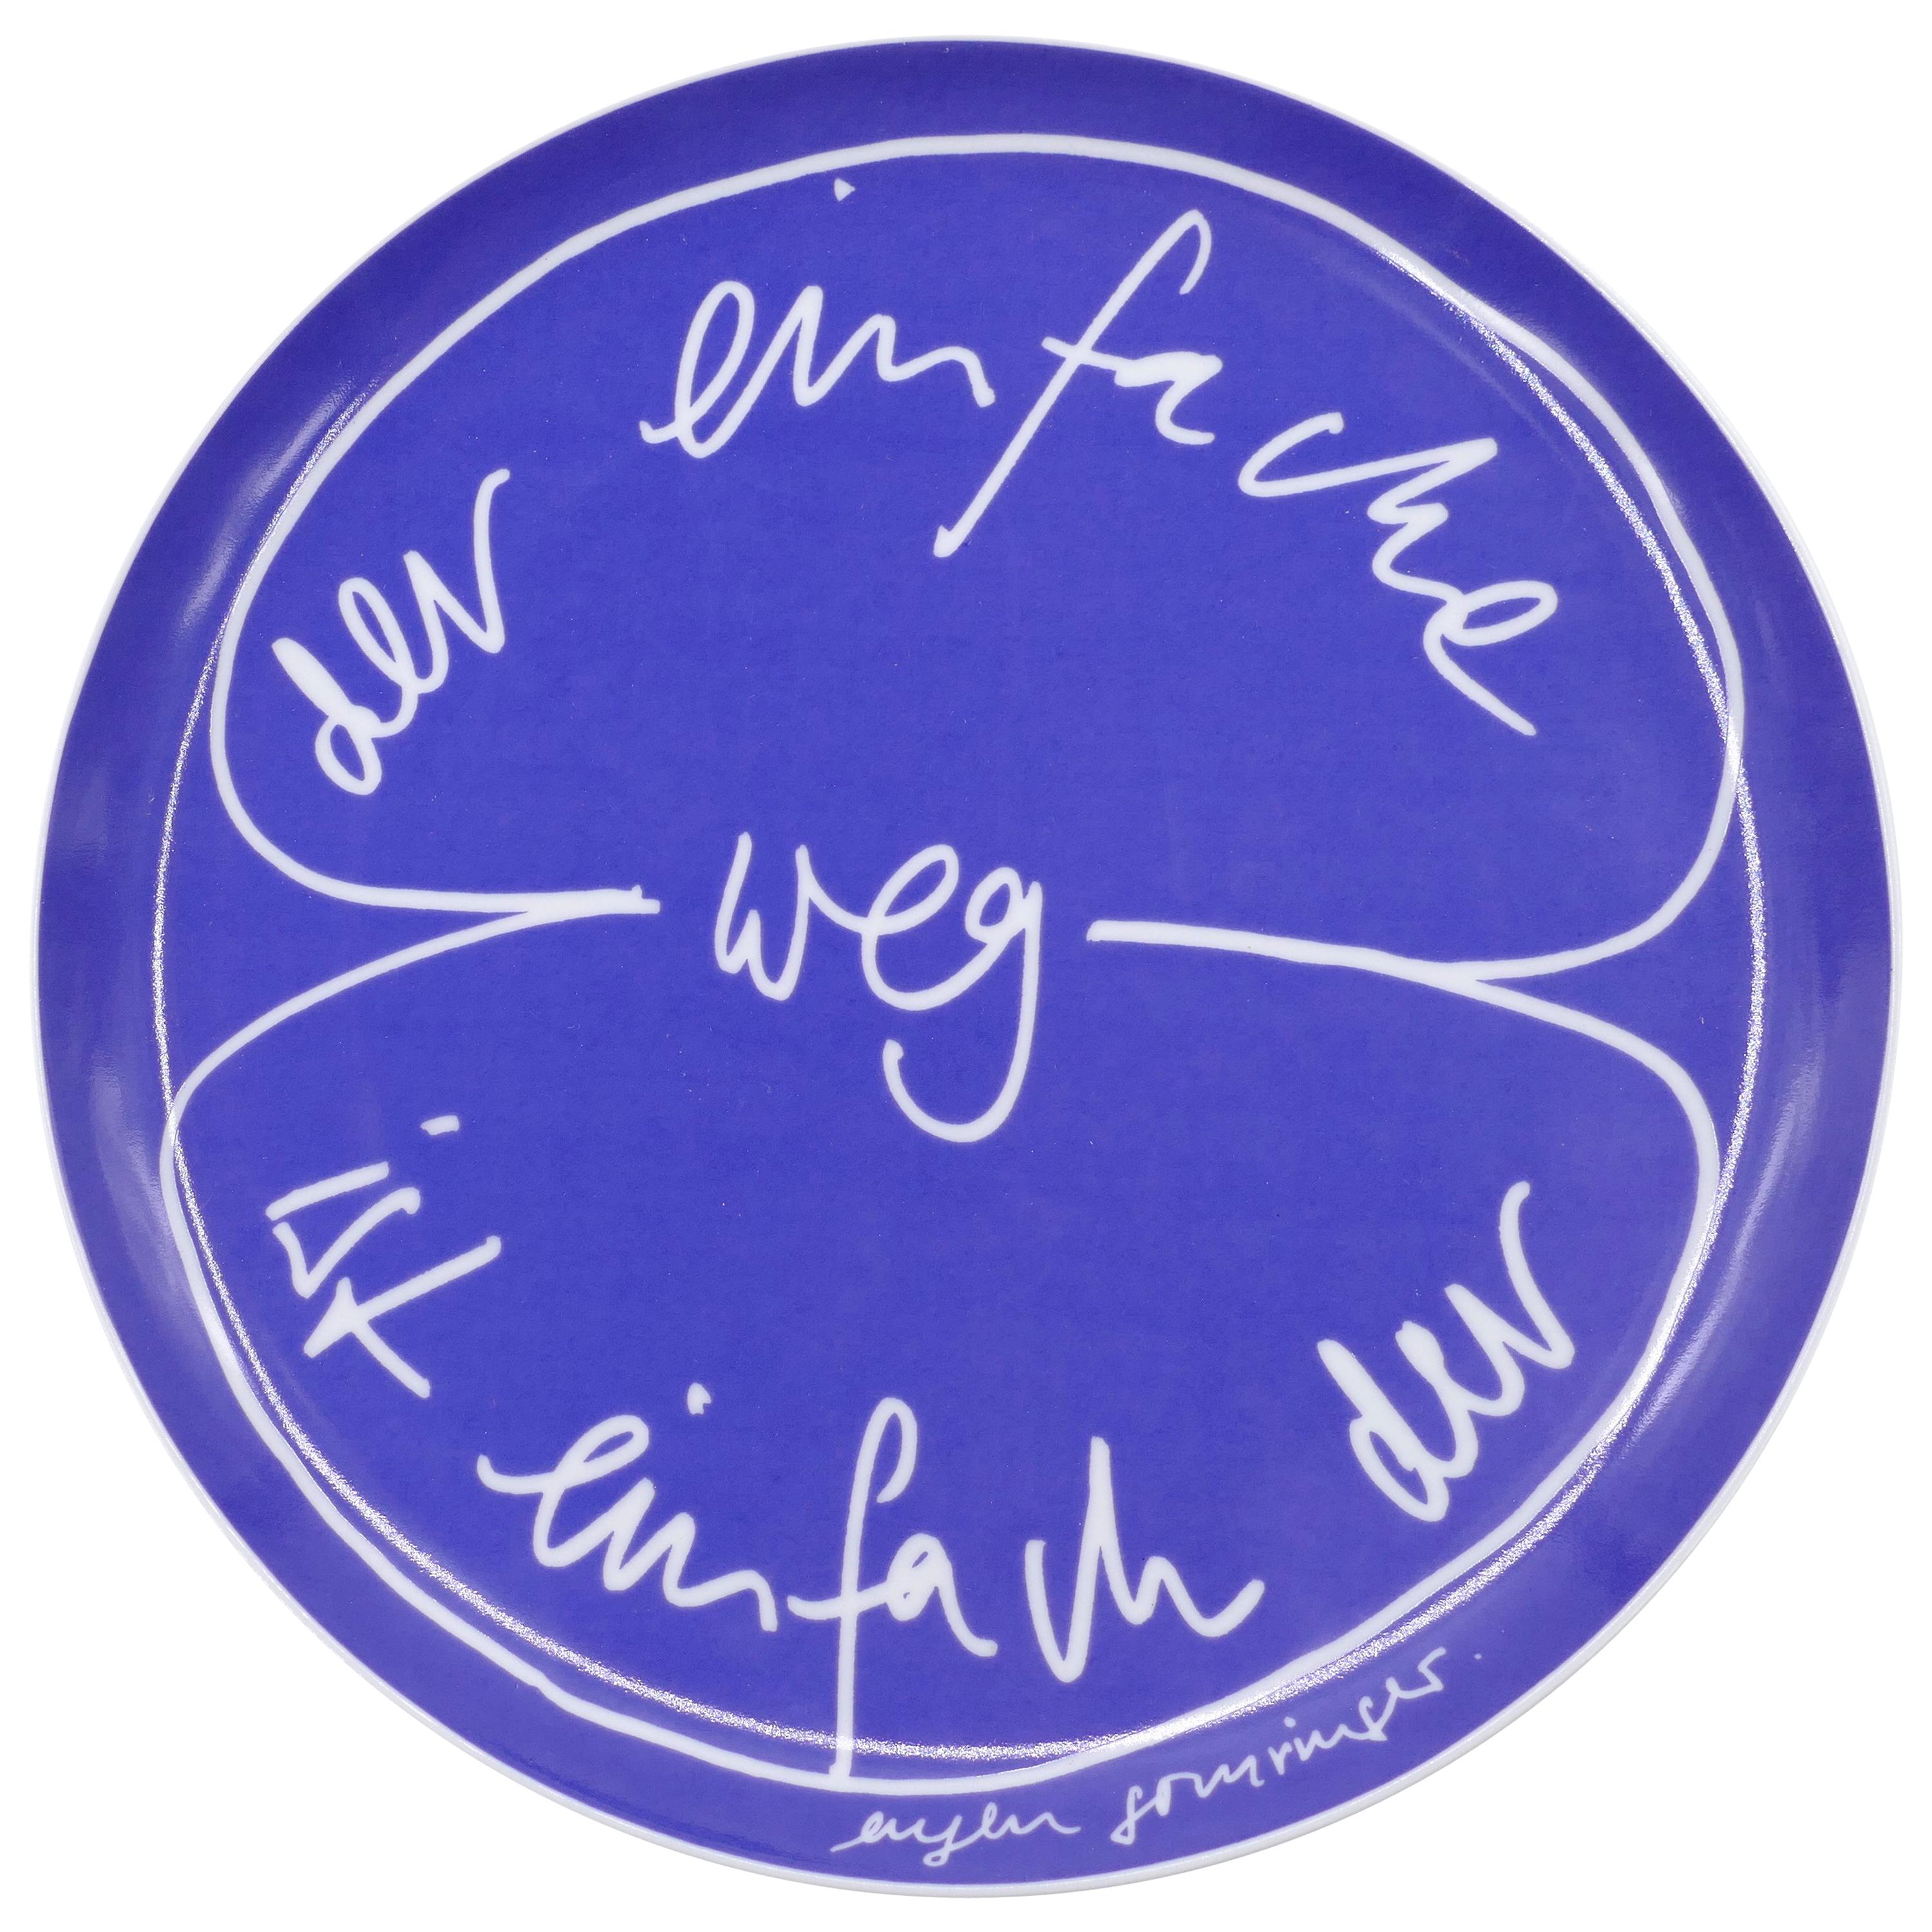 The Easy Way is Just the Way, Original Ceramic Plate by Eugene Gomringer, 1970s